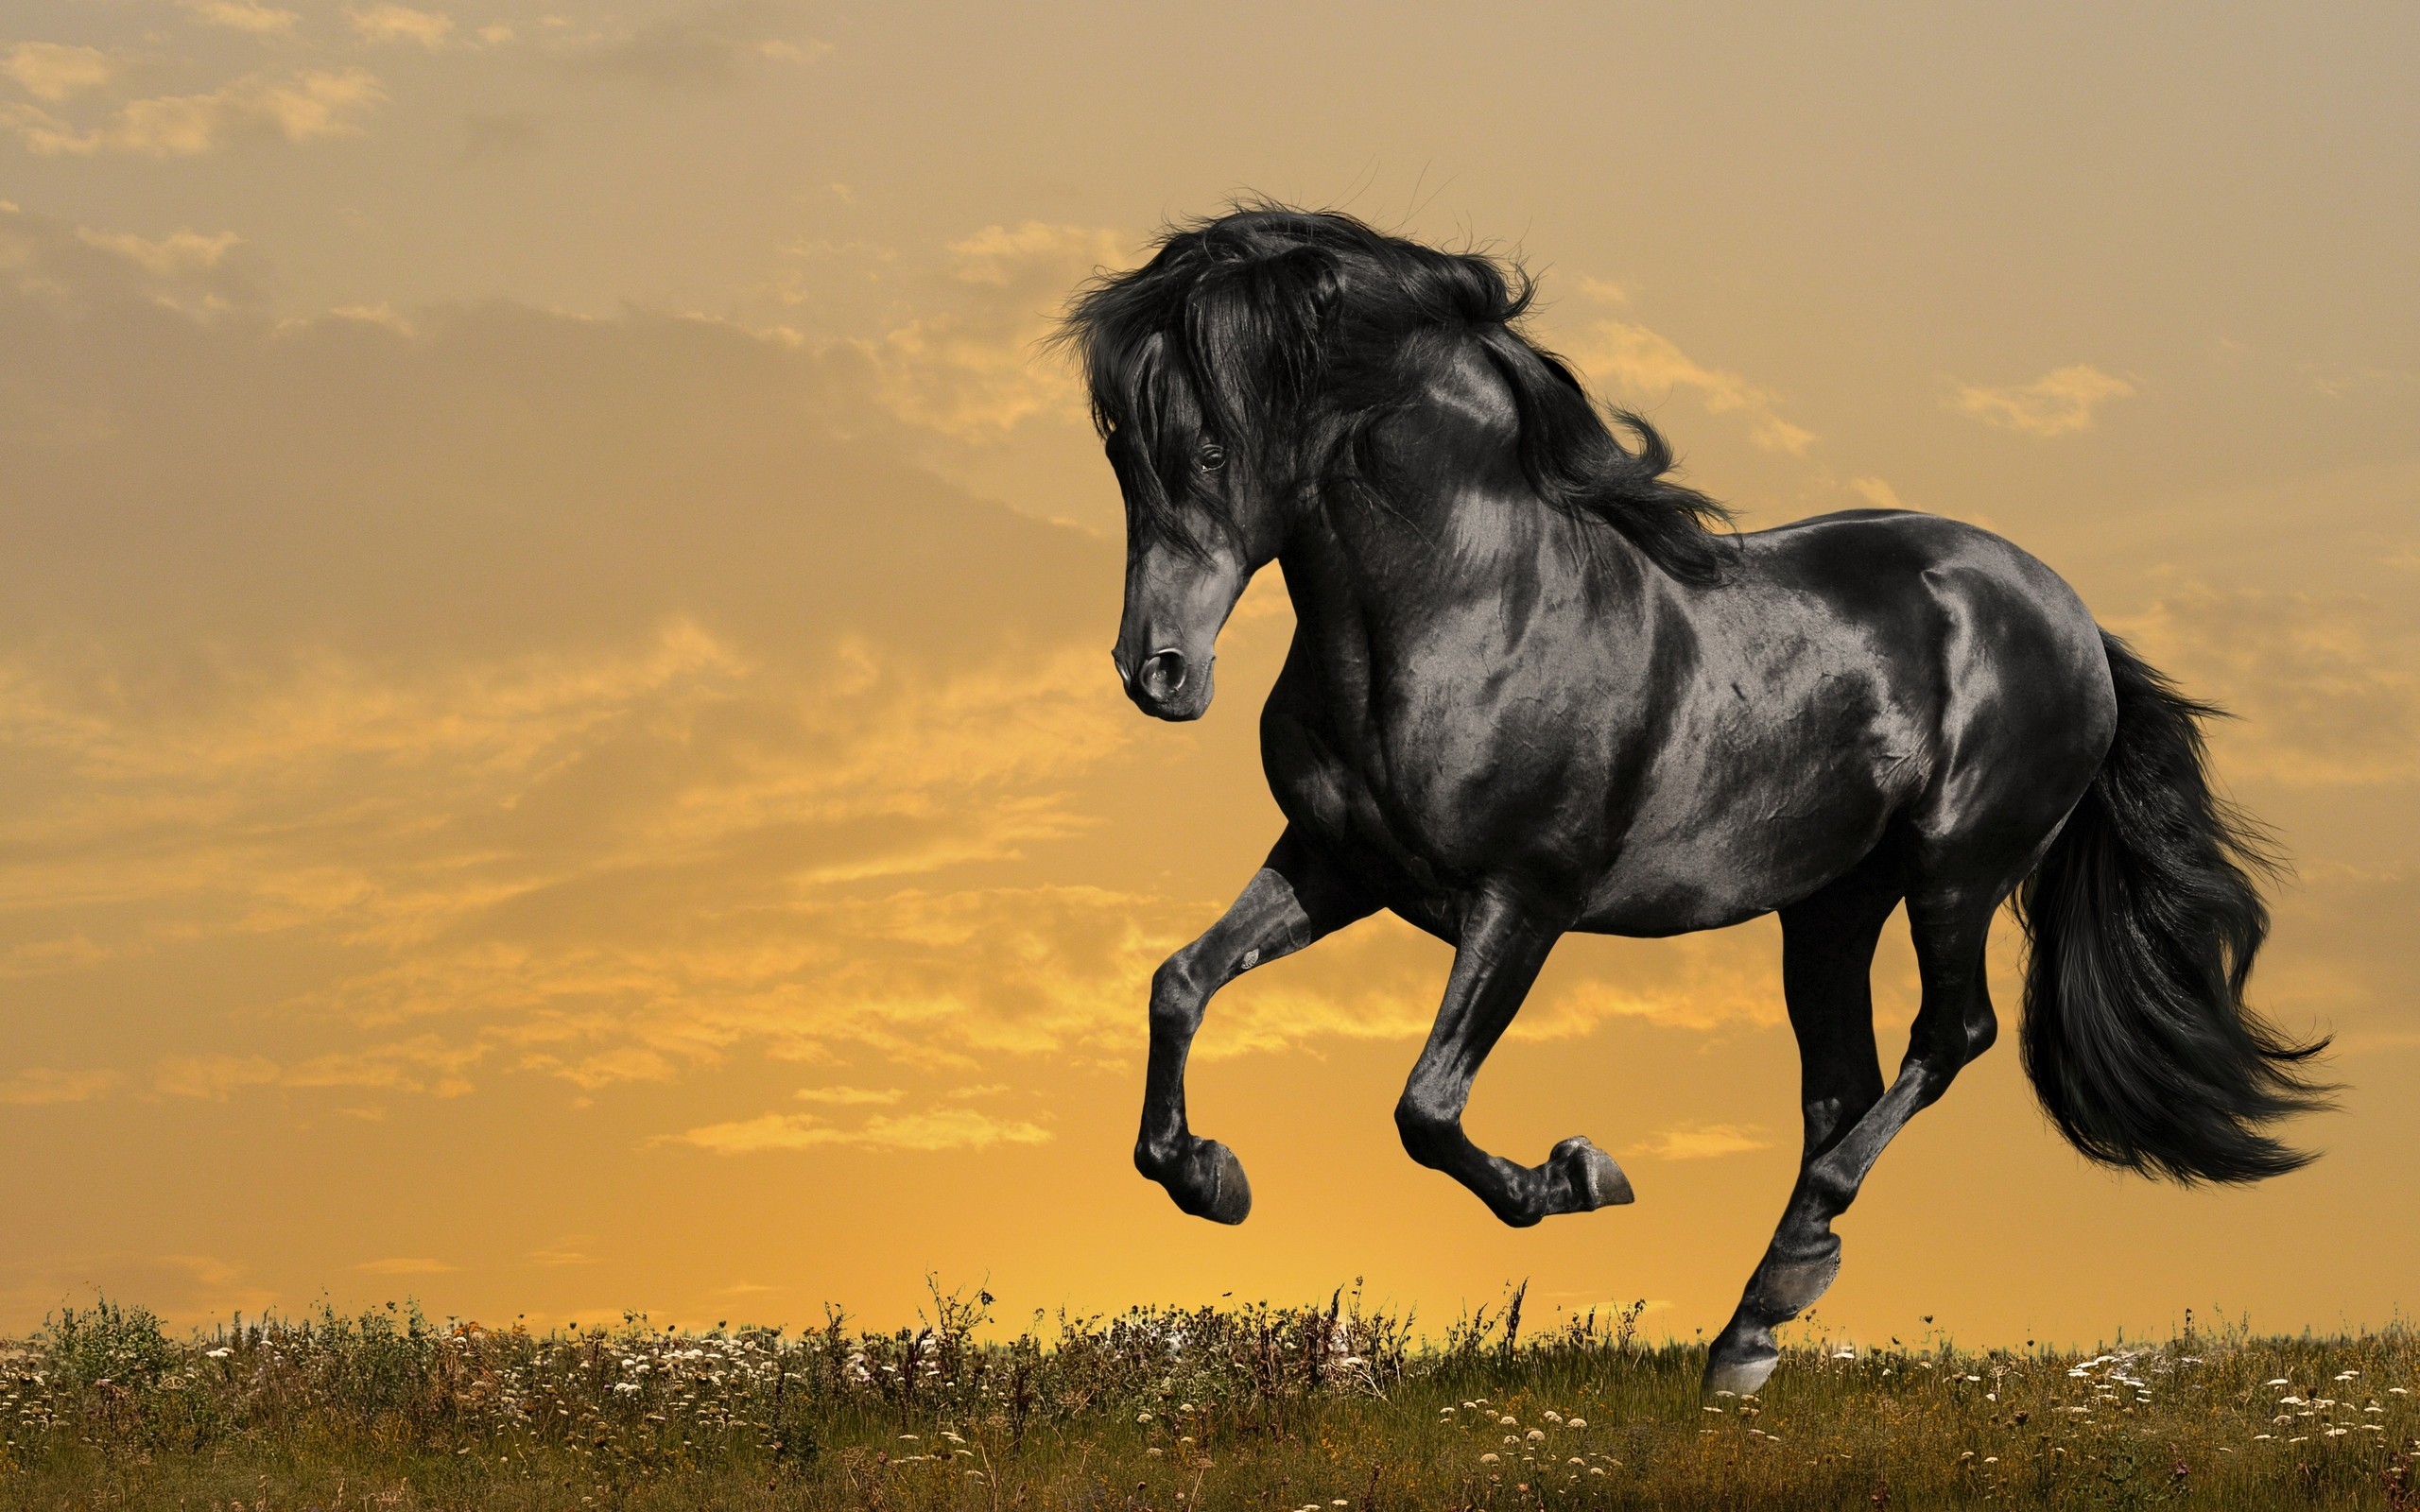 2560x1600 1920x1080 Dreamy Horse With Stars - Fantasy Art Wallpaper | Wallpaper  Studio 10 | Tens of thousands HD and UltraHD wallpapers for Android,  Windows and Xbox